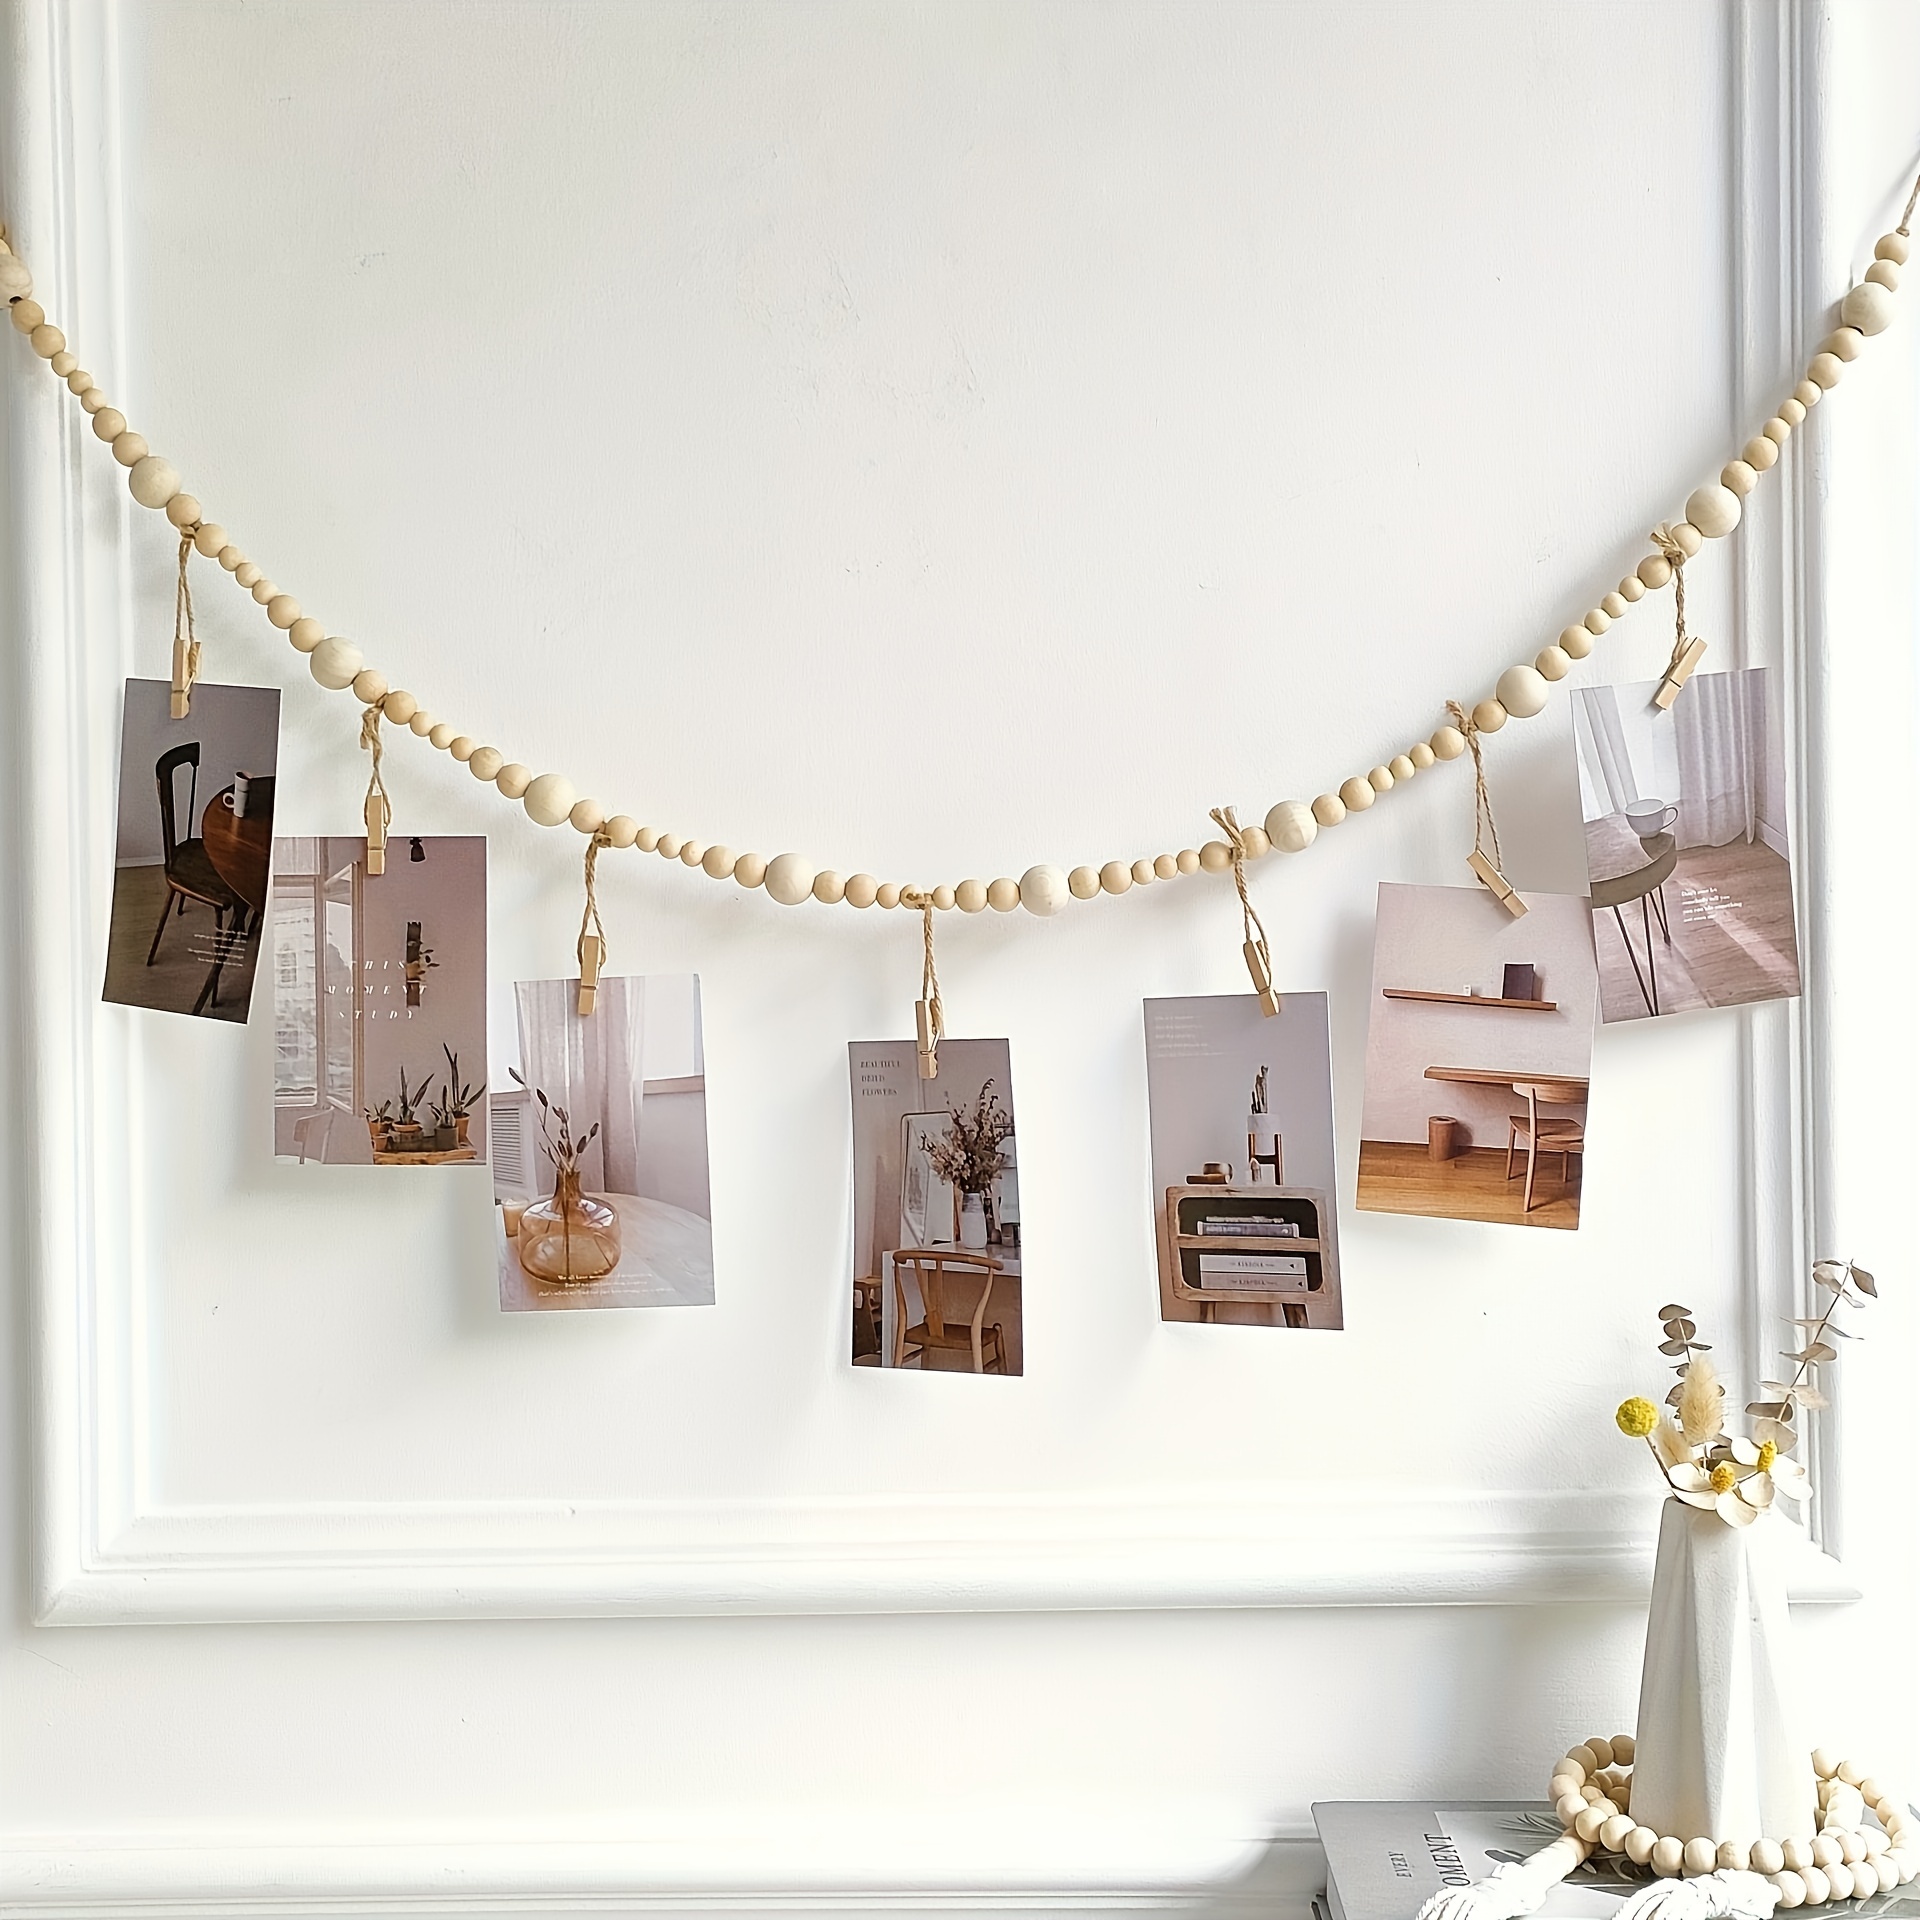 Wall Hanging Photo Display with Wooden Beads Garland, Collage